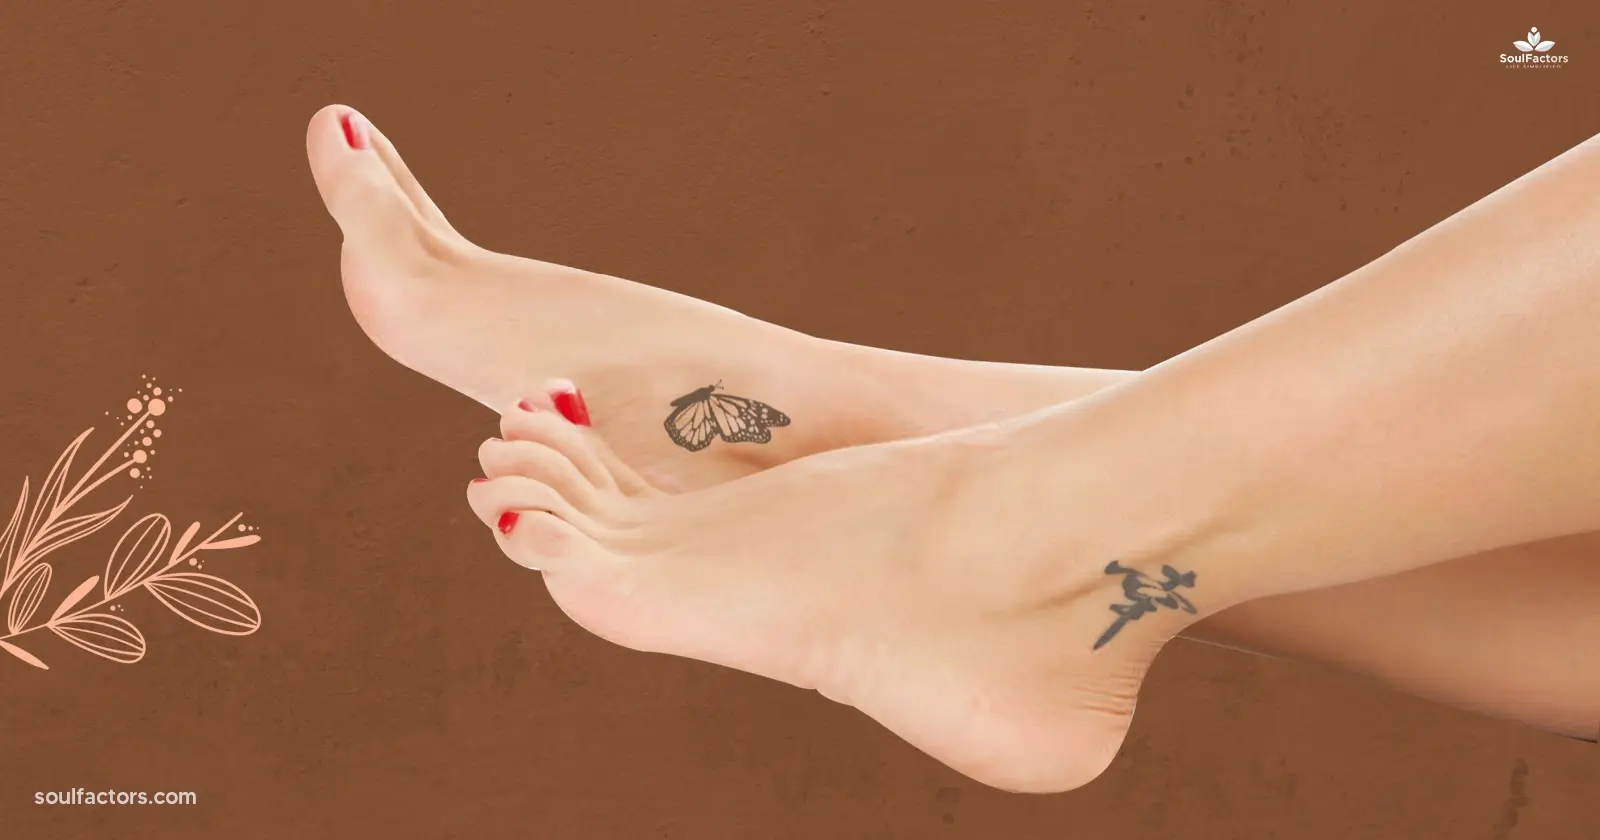 Ankle Tattoo ideas Awesomeness from any - Feature copy